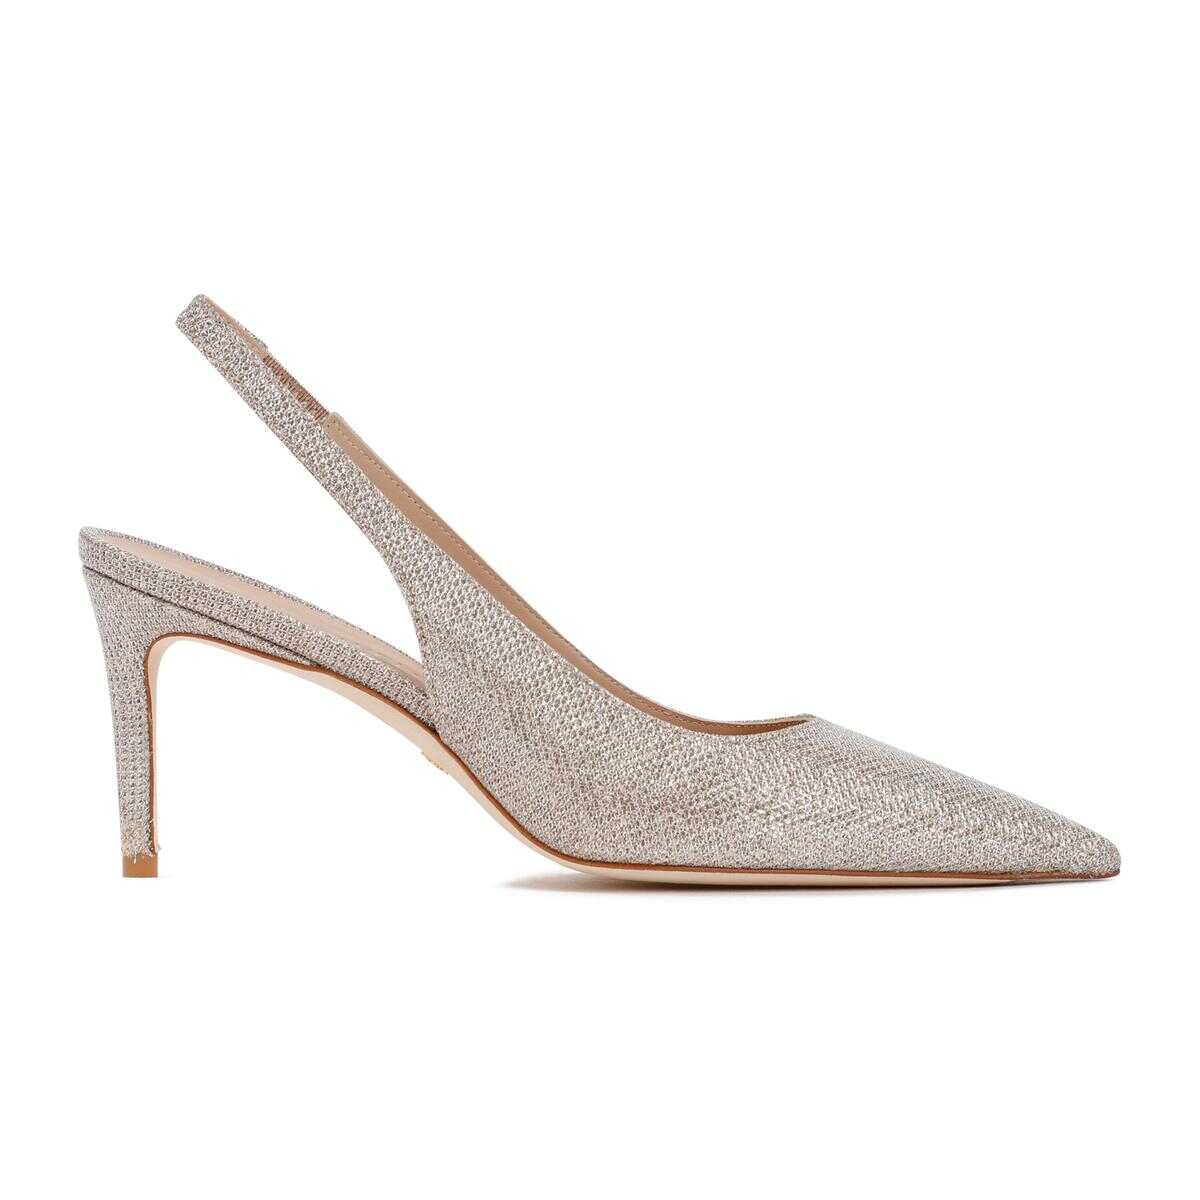 Stuart Weitzman STUART WEITZMAN STUART 75 SLING PUMP SHOES Nude & Neutrals